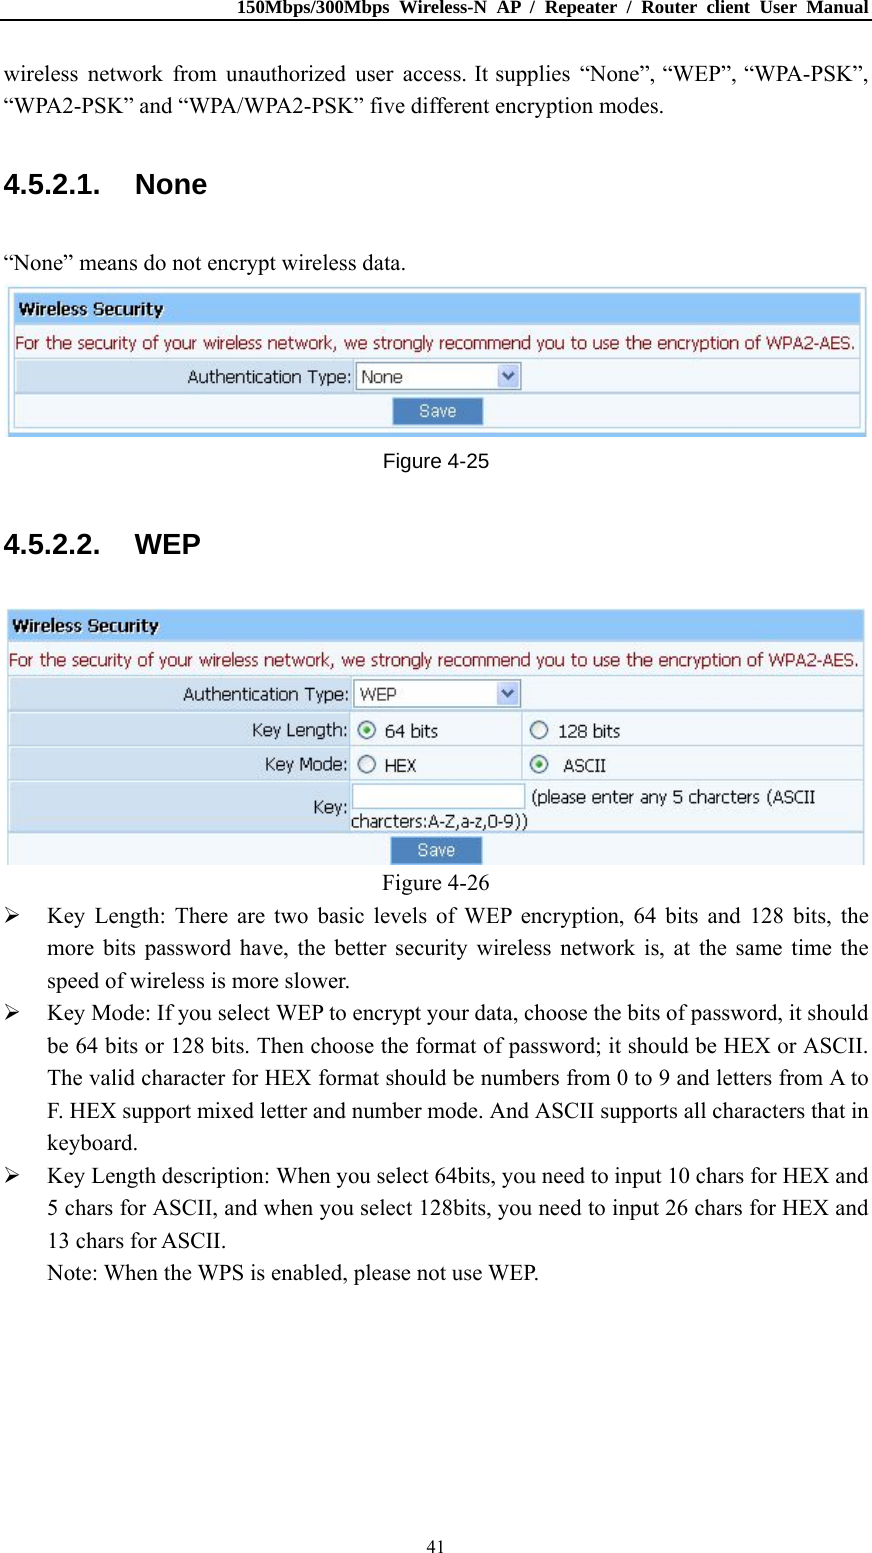 150Mbps/300Mbps Wireless-N AP / Repeater / Router client User Manual  41wireless network from unauthorized user access. It supplies “None”, “WEP”, “WPA-PSK”, “WPA2-PSK” and “WPA/WPA2-PSK” five different encryption modes. 4.5.2.1. None “None” means do not encrypt wireless data.  Figure 4-25 4.5.2.2. WEP  Figure 4-26  Key Length: There are two basic levels of WEP encryption, 64 bits and 128 bits, the more bits password have, the better security wireless network is, at the same time the speed of wireless is more slower.  Key Mode: If you select WEP to encrypt your data, choose the bits of password, it should be 64 bits or 128 bits. Then choose the format of password; it should be HEX or ASCII. The valid character for HEX format should be numbers from 0 to 9 and letters from A to F. HEX support mixed letter and number mode. And ASCII supports all characters that in keyboard.  Key Length description: When you select 64bits, you need to input 10 chars for HEX and 5 chars for ASCII, and when you select 128bits, you need to input 26 chars for HEX and 13 chars for ASCII. Note: When the WPS is enabled, please not use WEP. 